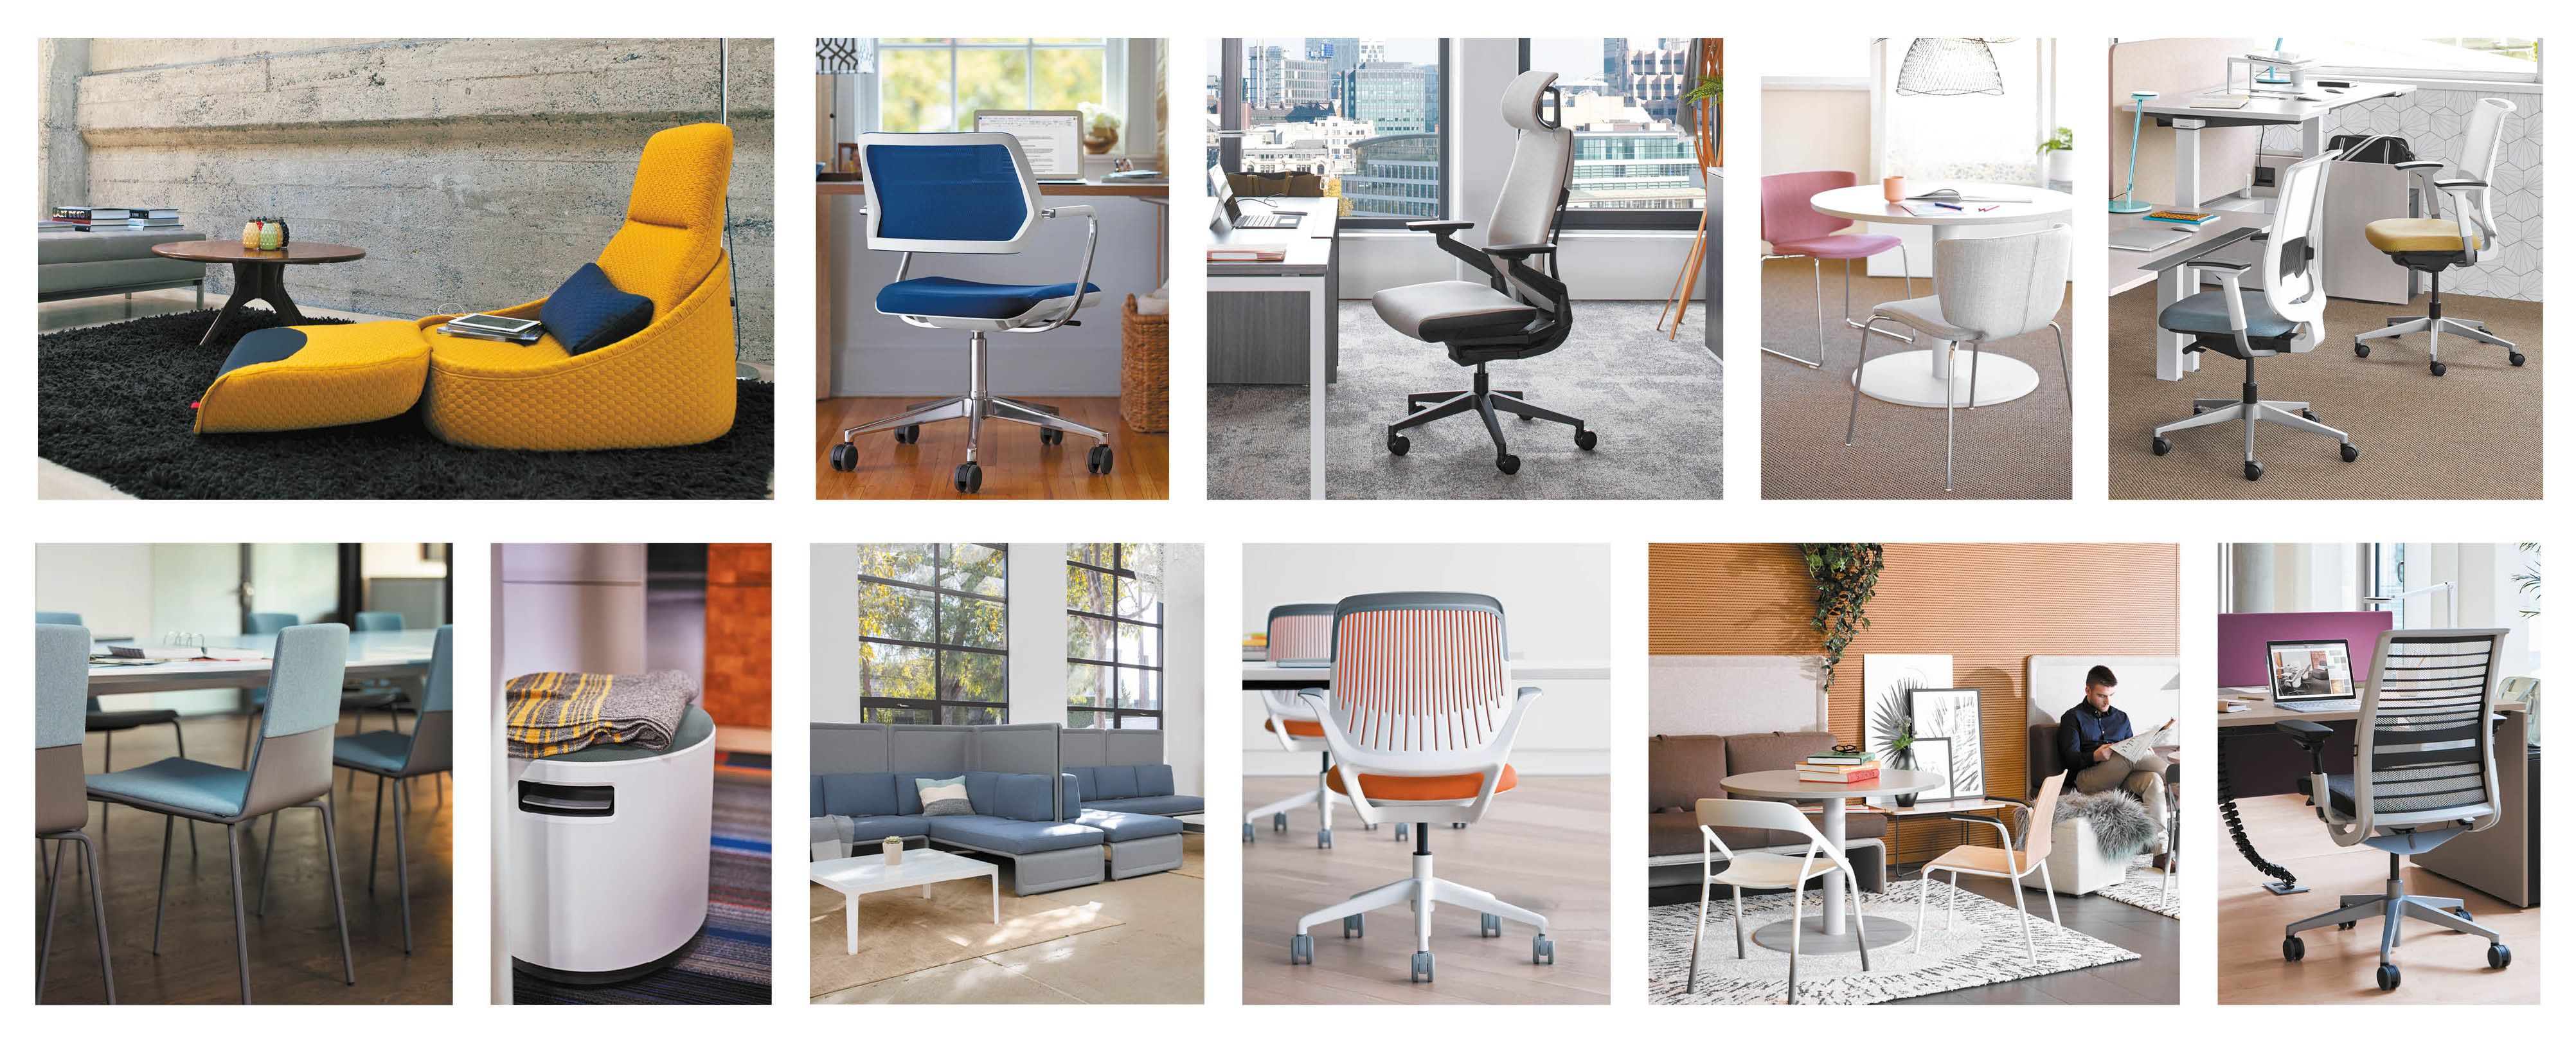 Office Lounge Furniture & Lobby Chairs | Steelcase Regarding Chari Media Center Tables (View 18 of 30)